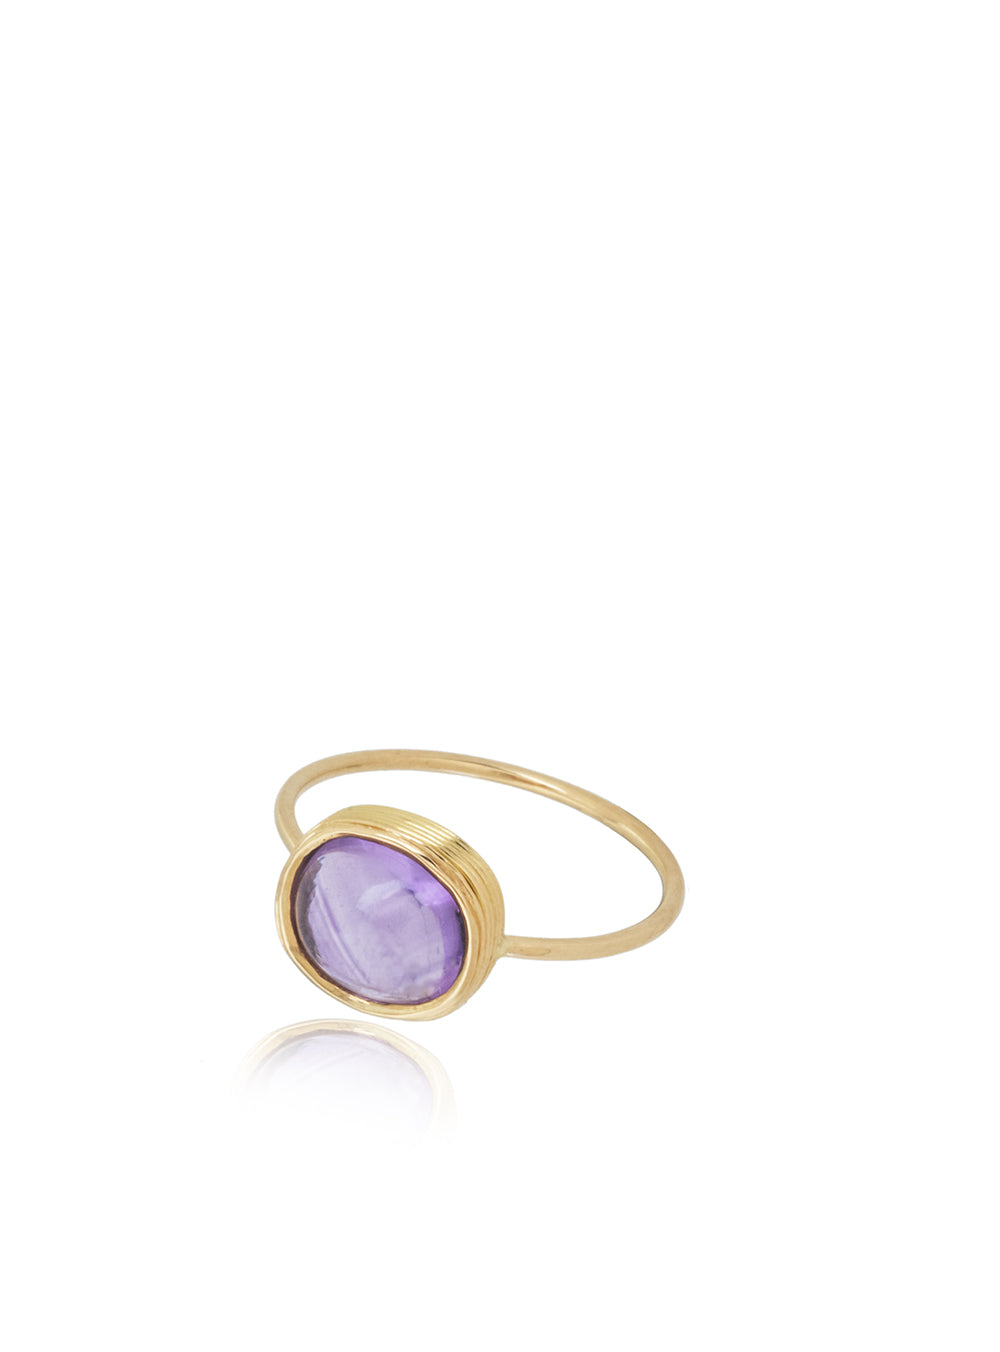 AMETHYST AND GOLD RING